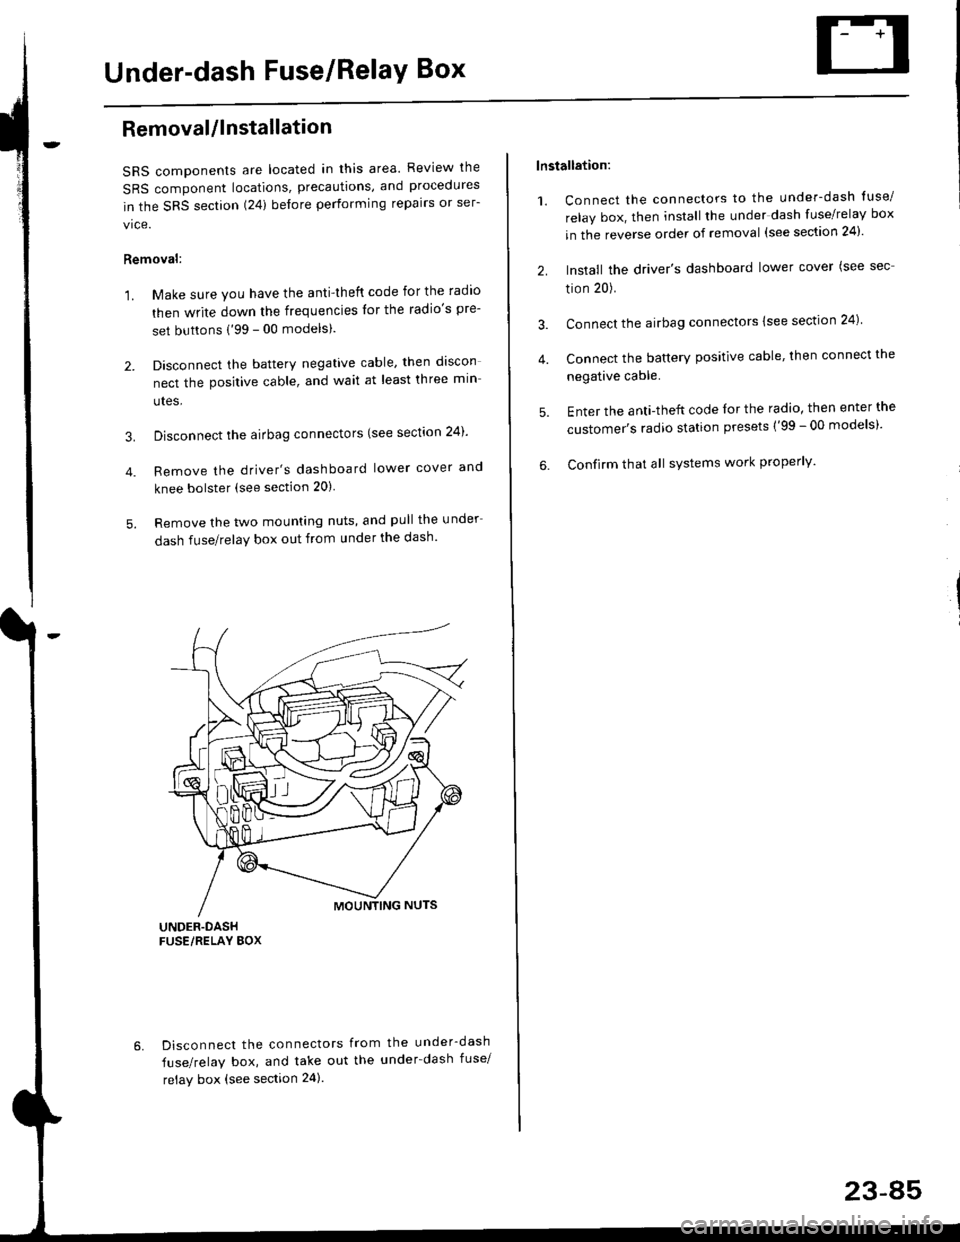 HONDA CIVIC 1996 6.G Workshop Manual Under-dash Fuse/RelaY Box
Removal/lnstallation
SRS components are located in this area. Review lhe
SRS component locations, precautions, and procedures
in the SRS section (24) before performing repair